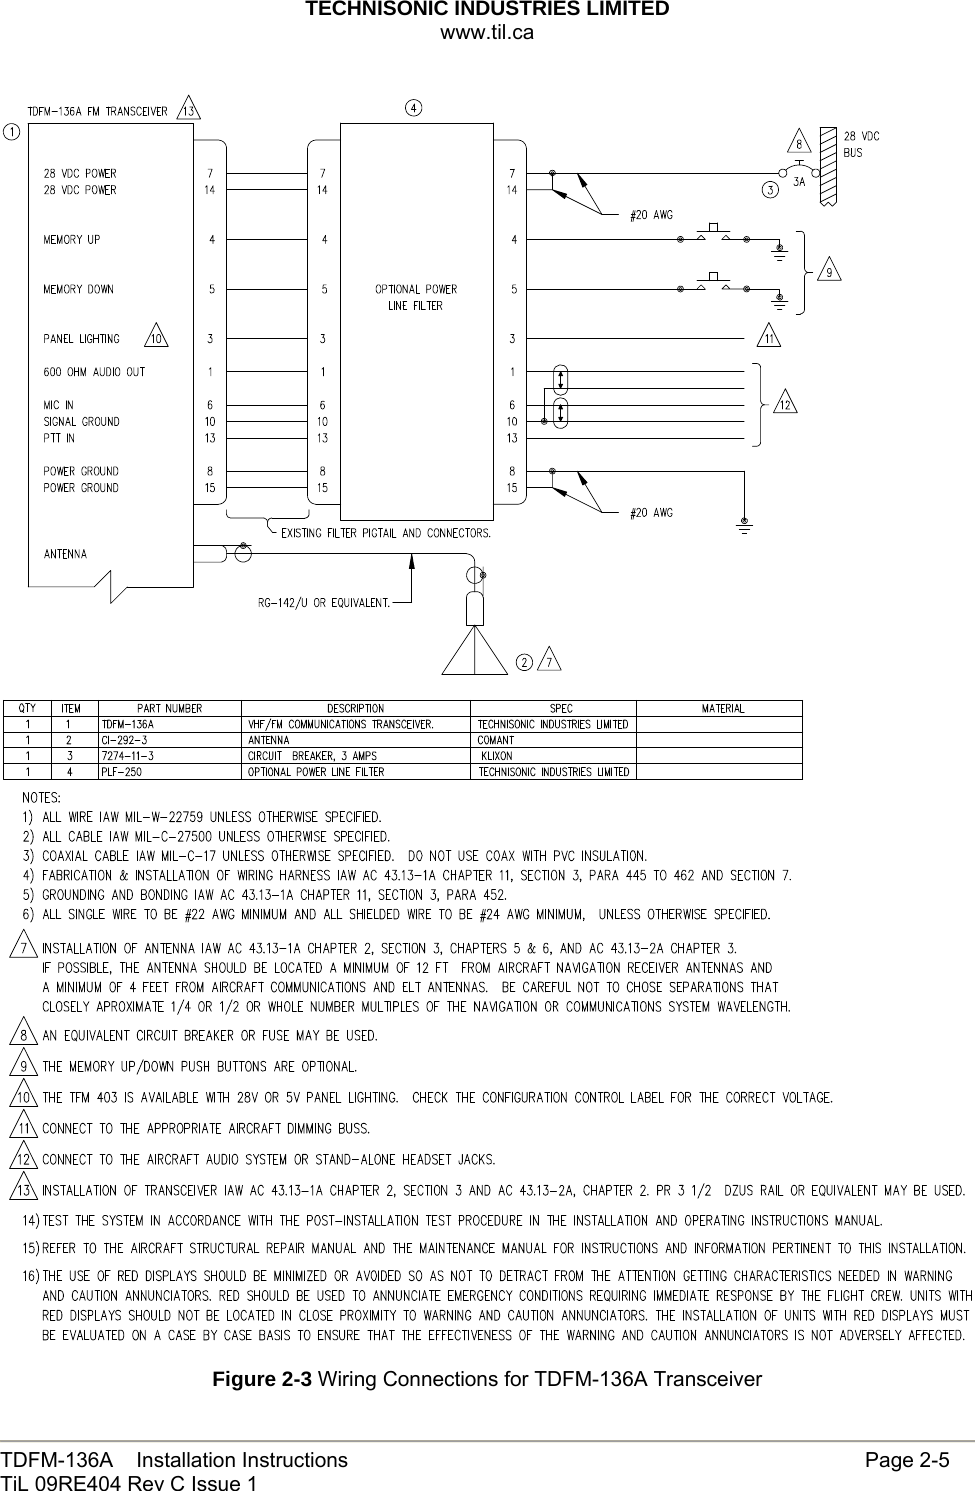 TECHNISONIC INDUSTRIES LIMITED www.til.ca   TDFM-136A    Installation Instructions                     Page 2-5 TiL 09RE404 Rev C Issue 1      Figure 2-3 Wiring Connections for TDFM-136A Transceiver 